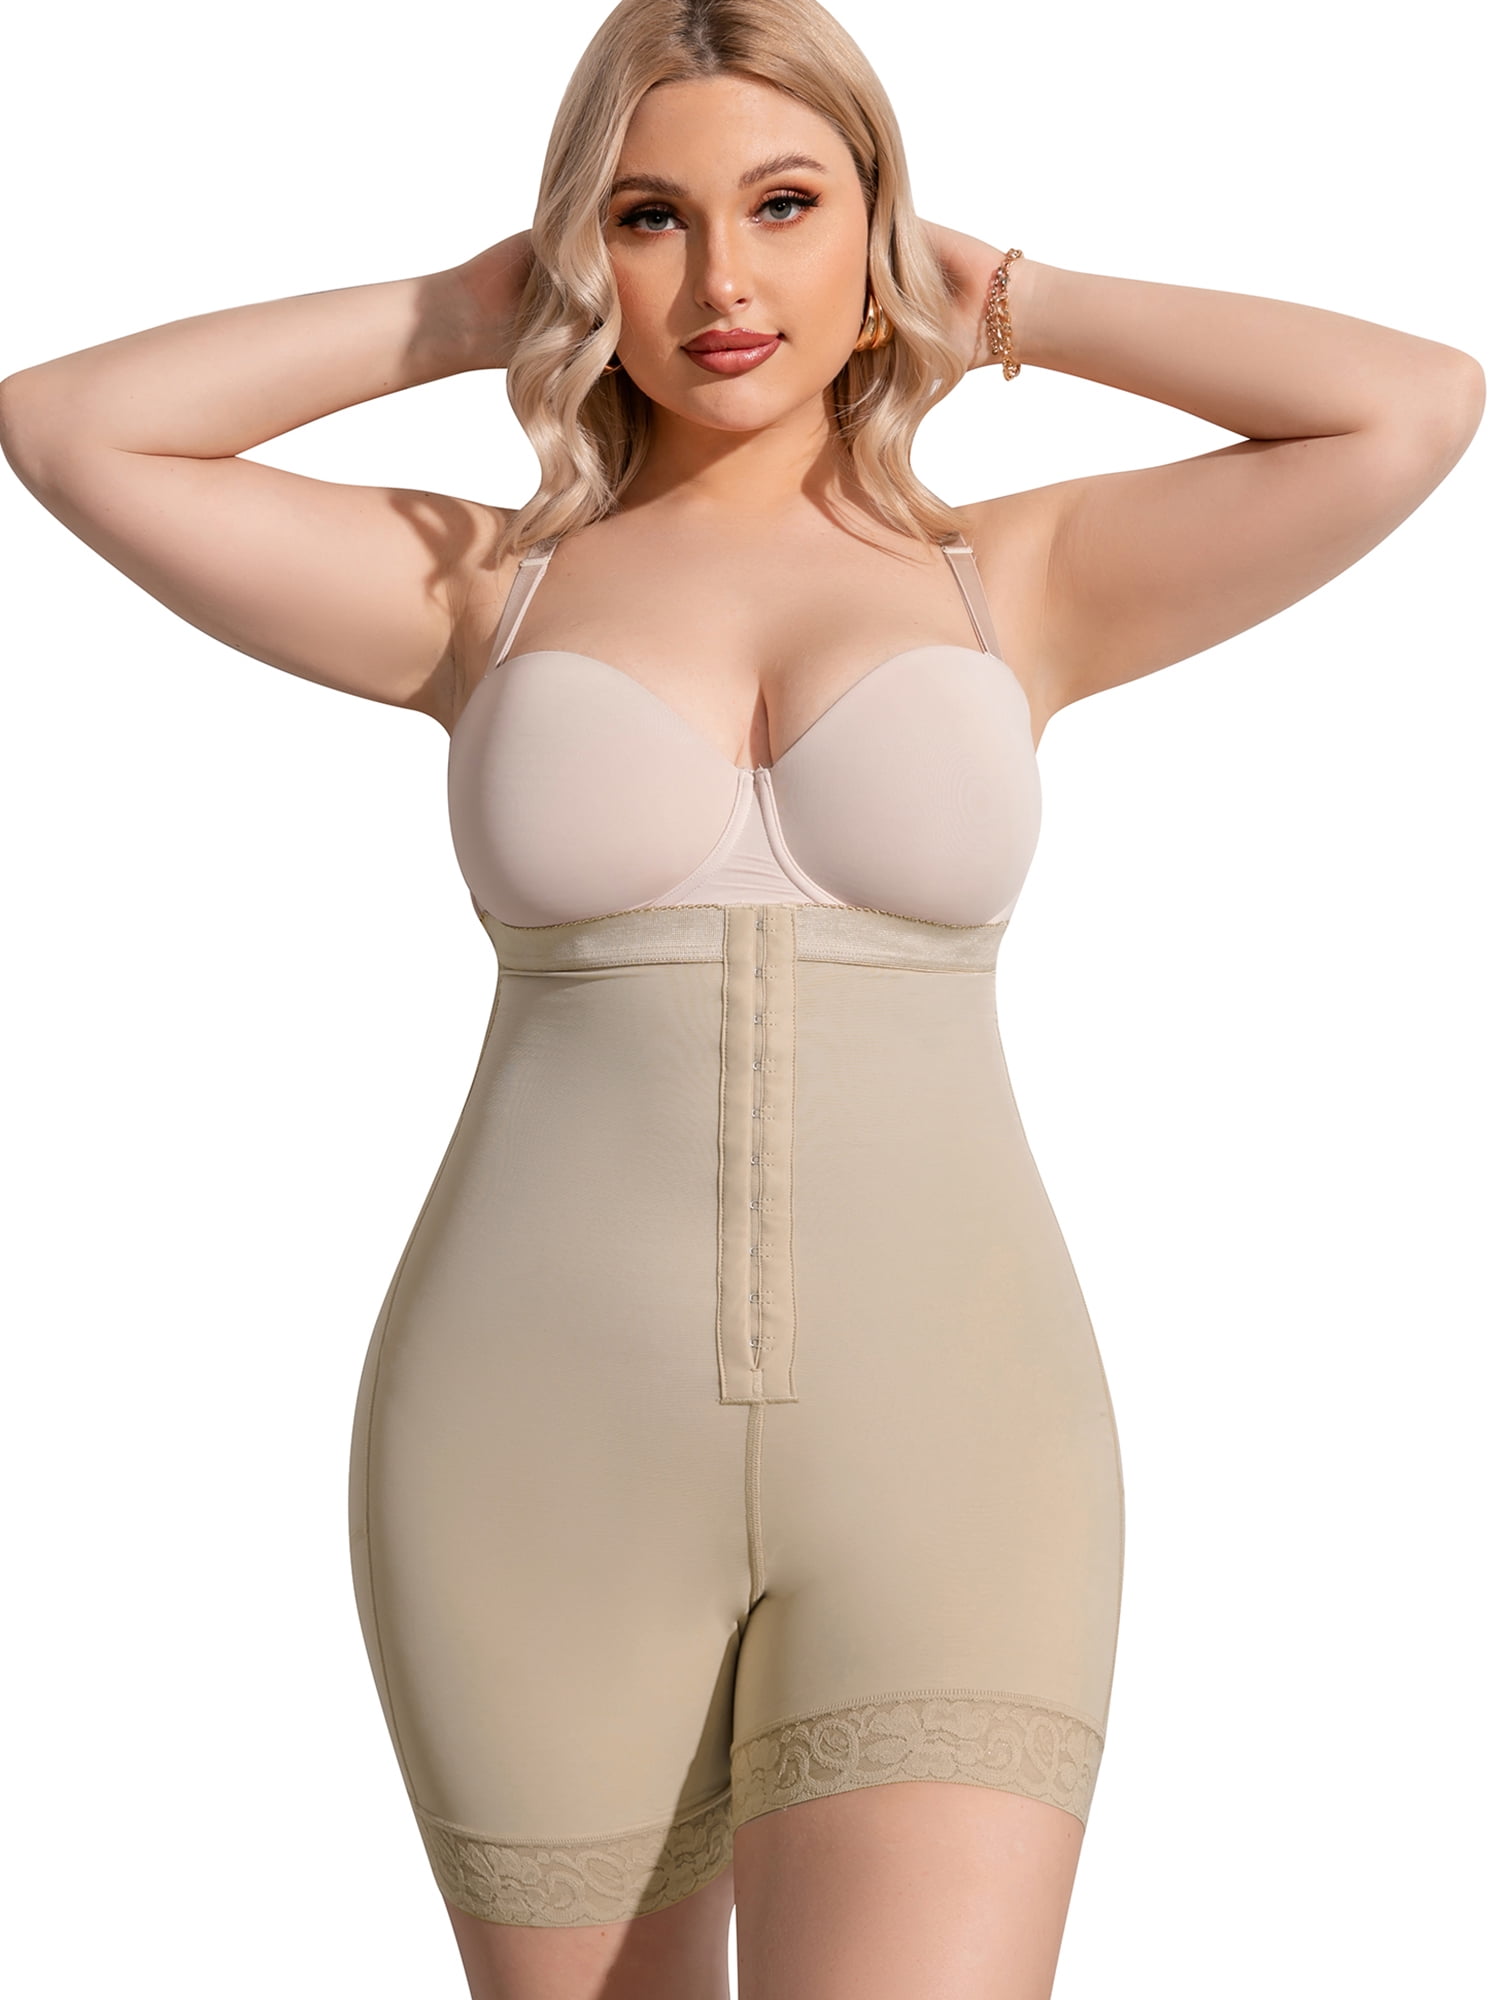 Buy Standard Quality China Wholesale Wholesale Female Butt Lifter Plus Size  Shapers Corset Shorts High Waist Full Body Shaper For Women $11.06 Direct  from Factory at Zhengzhou Honeywell Medical Products Co.,Ltd